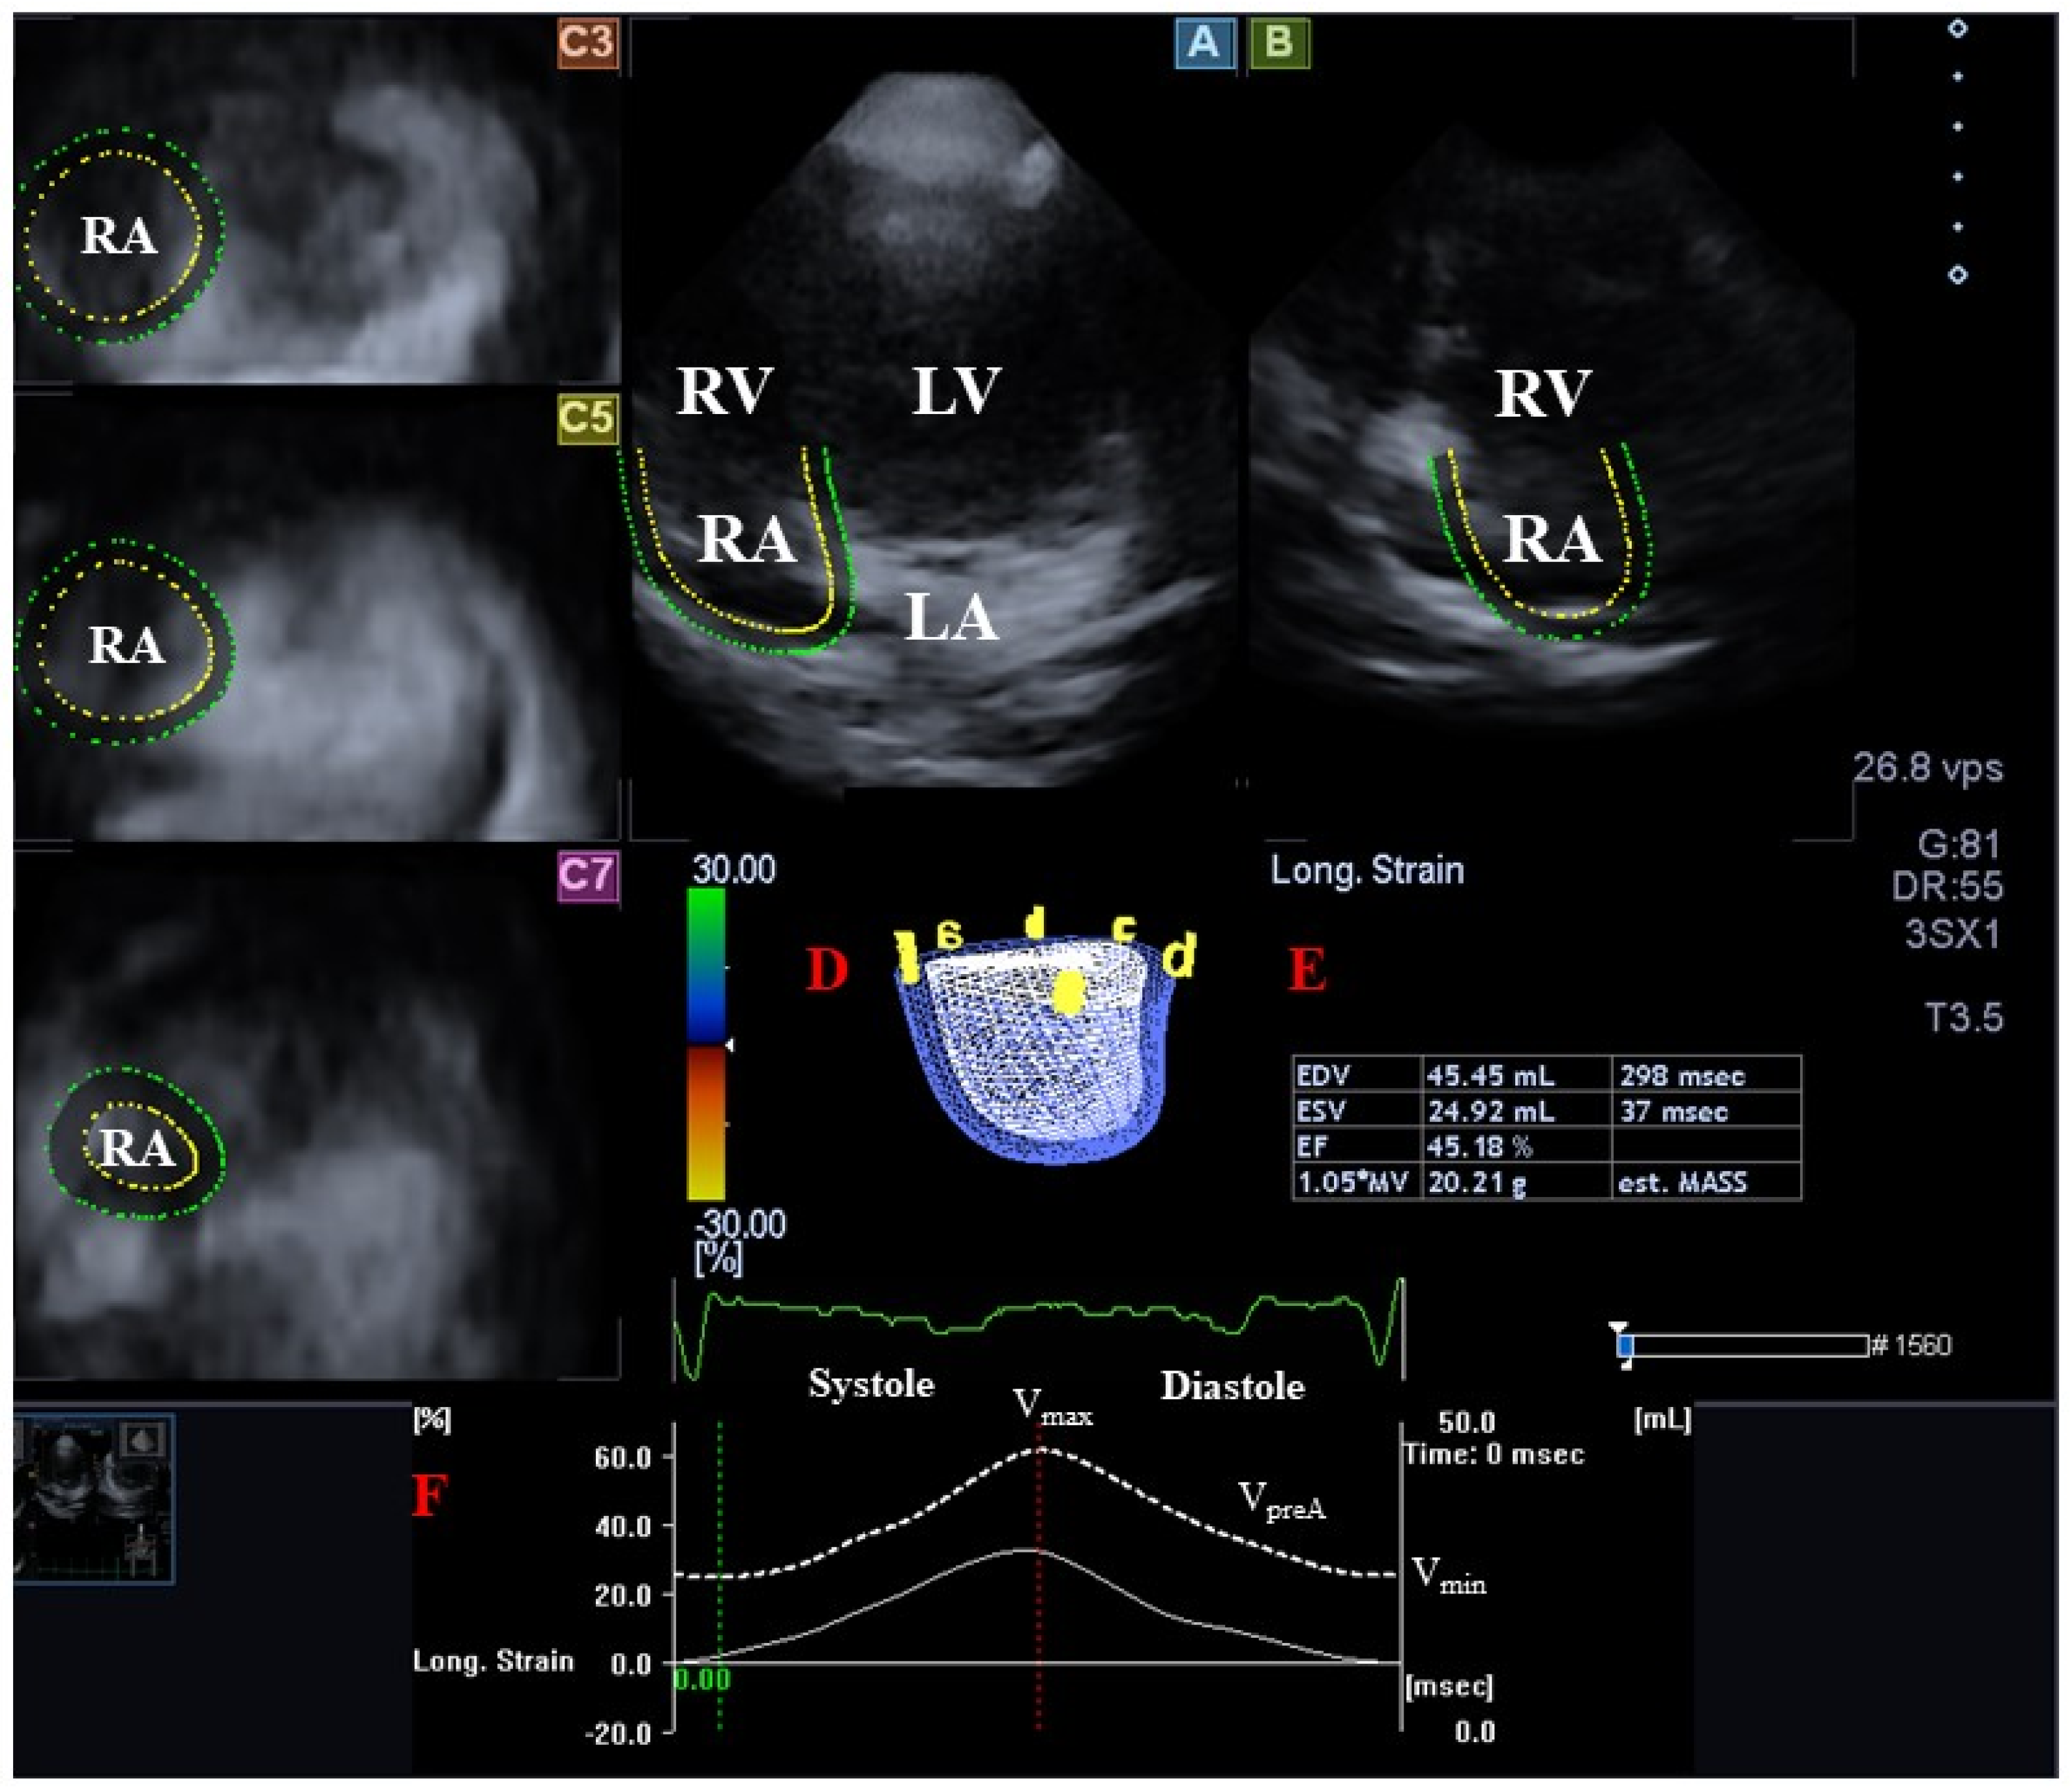 Time-course changes in echo-derived parameters: (a) LV mass (echo